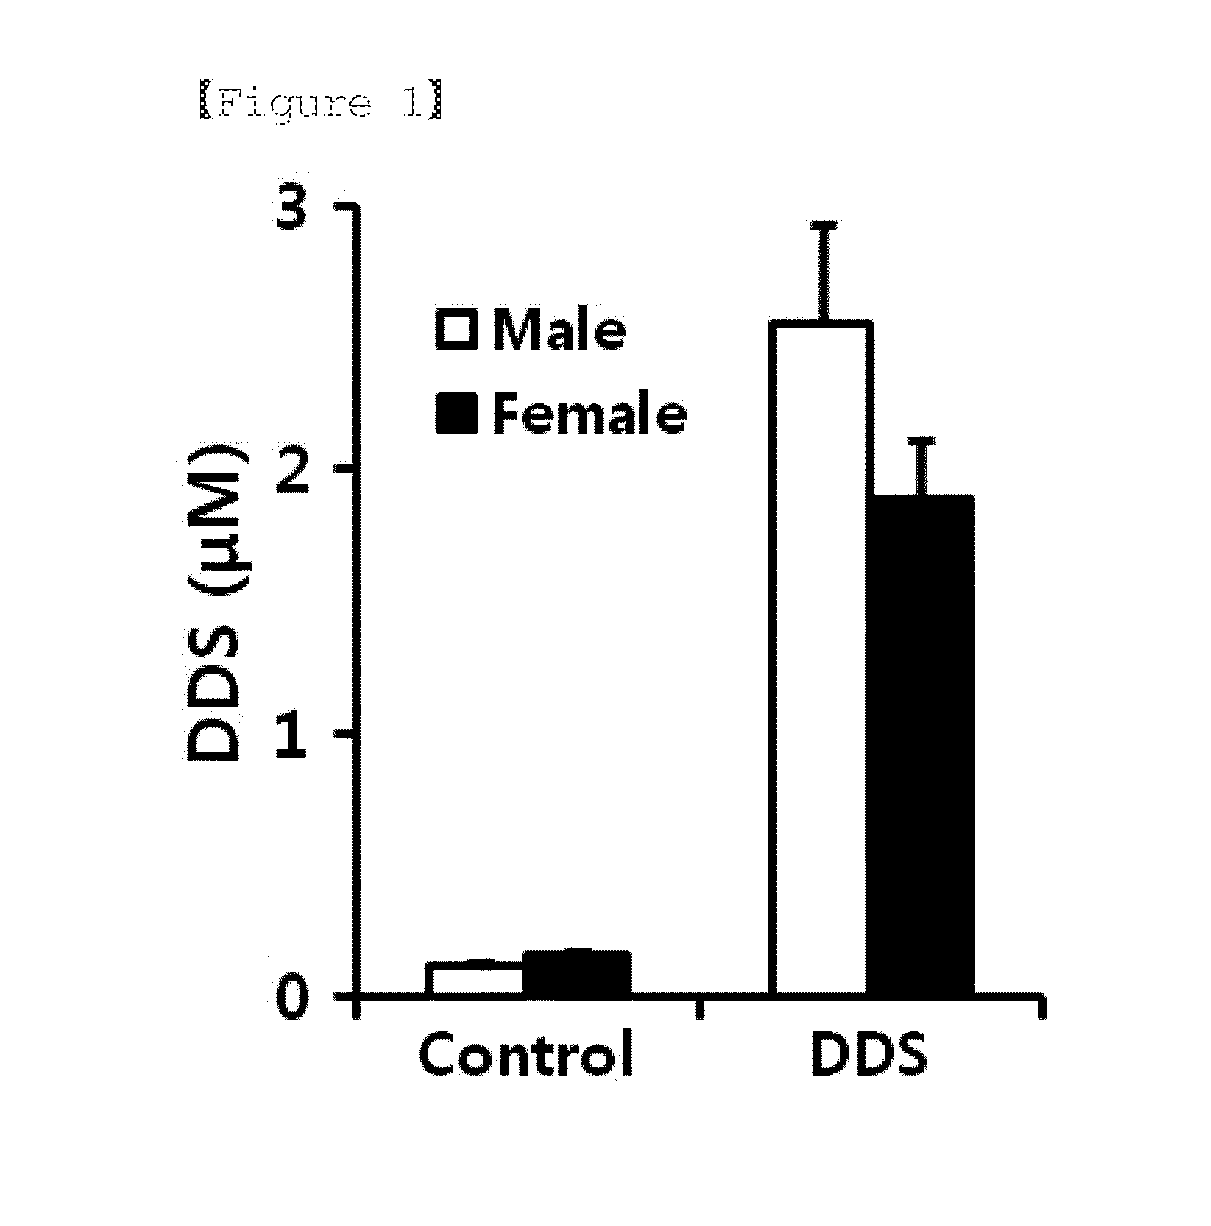 Pharmaceutical Composition for Preventing or Treating Muscle Wasting-Related Disease Comprising Diaminodiphenylsulfone or Pharmaceutically Acceptable Salt Thereof